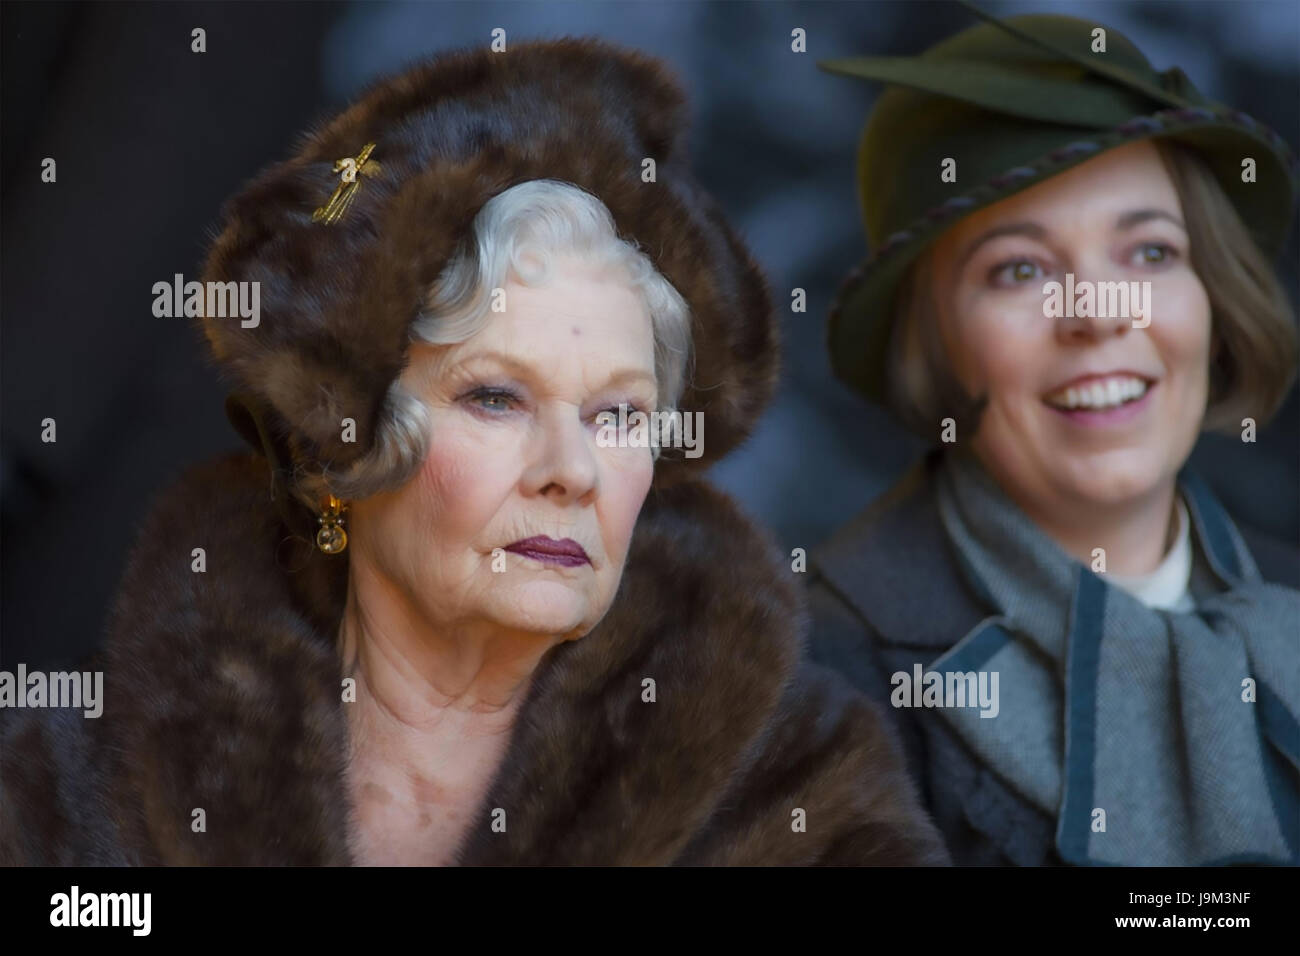 MURDER ON THE ORINET EXPRESS 2017 20th Century Fox film with Judi Dench at left as Princess Natalia and Olivia Coleman as Hildegarde Schmidt Stock Photo